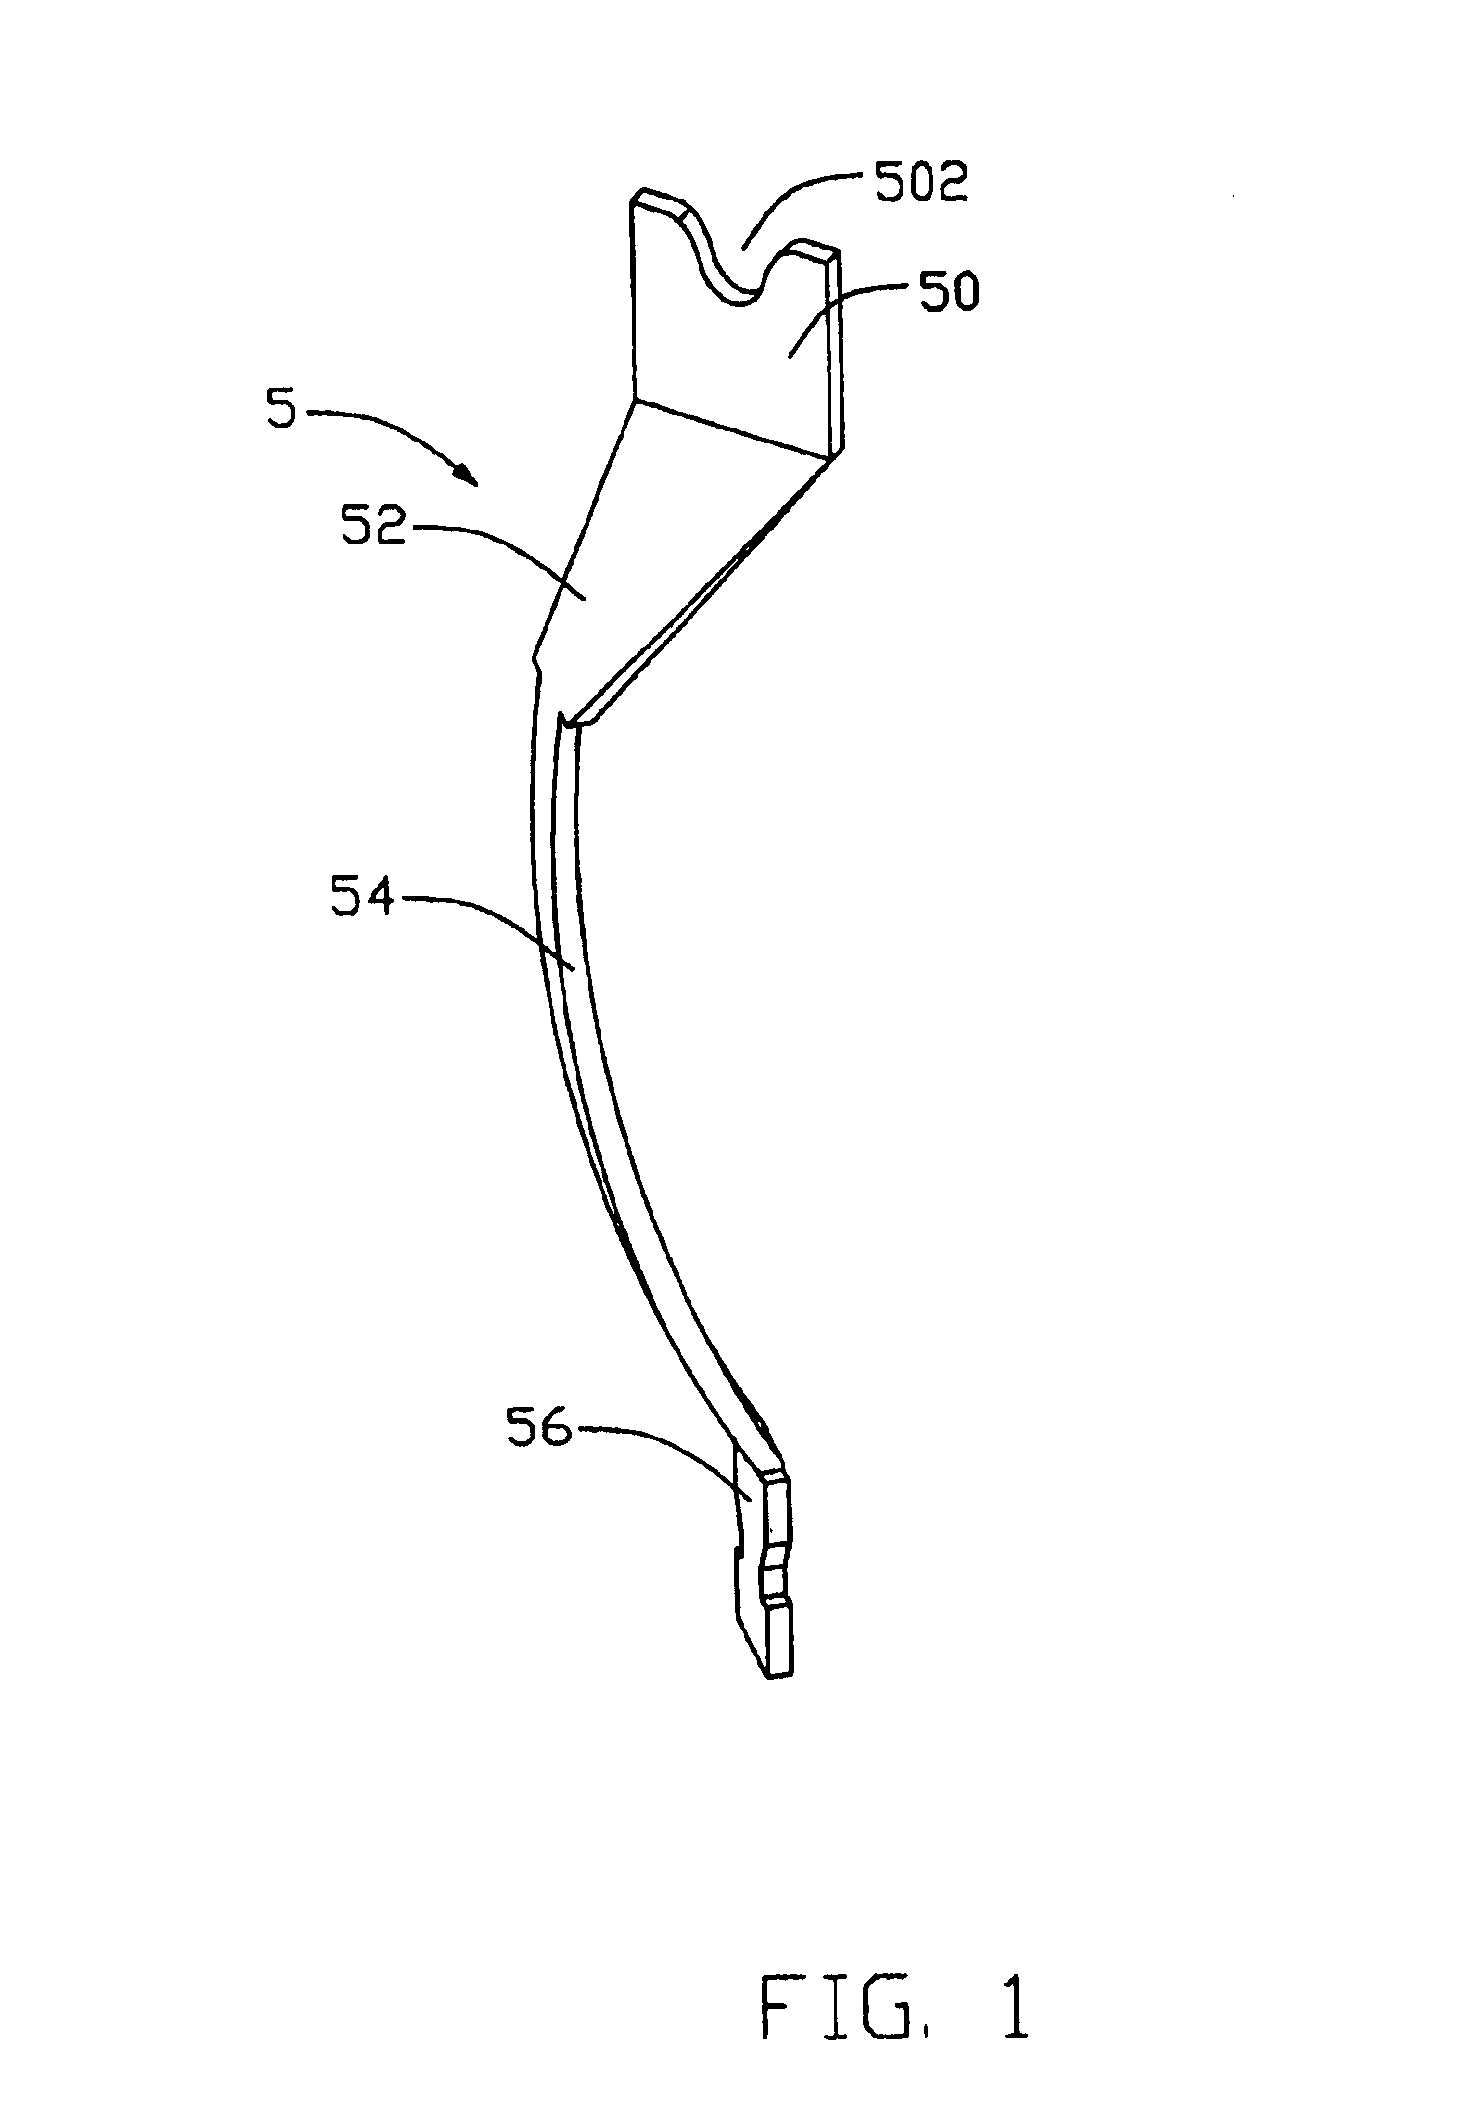 Twist contact for electrical connector